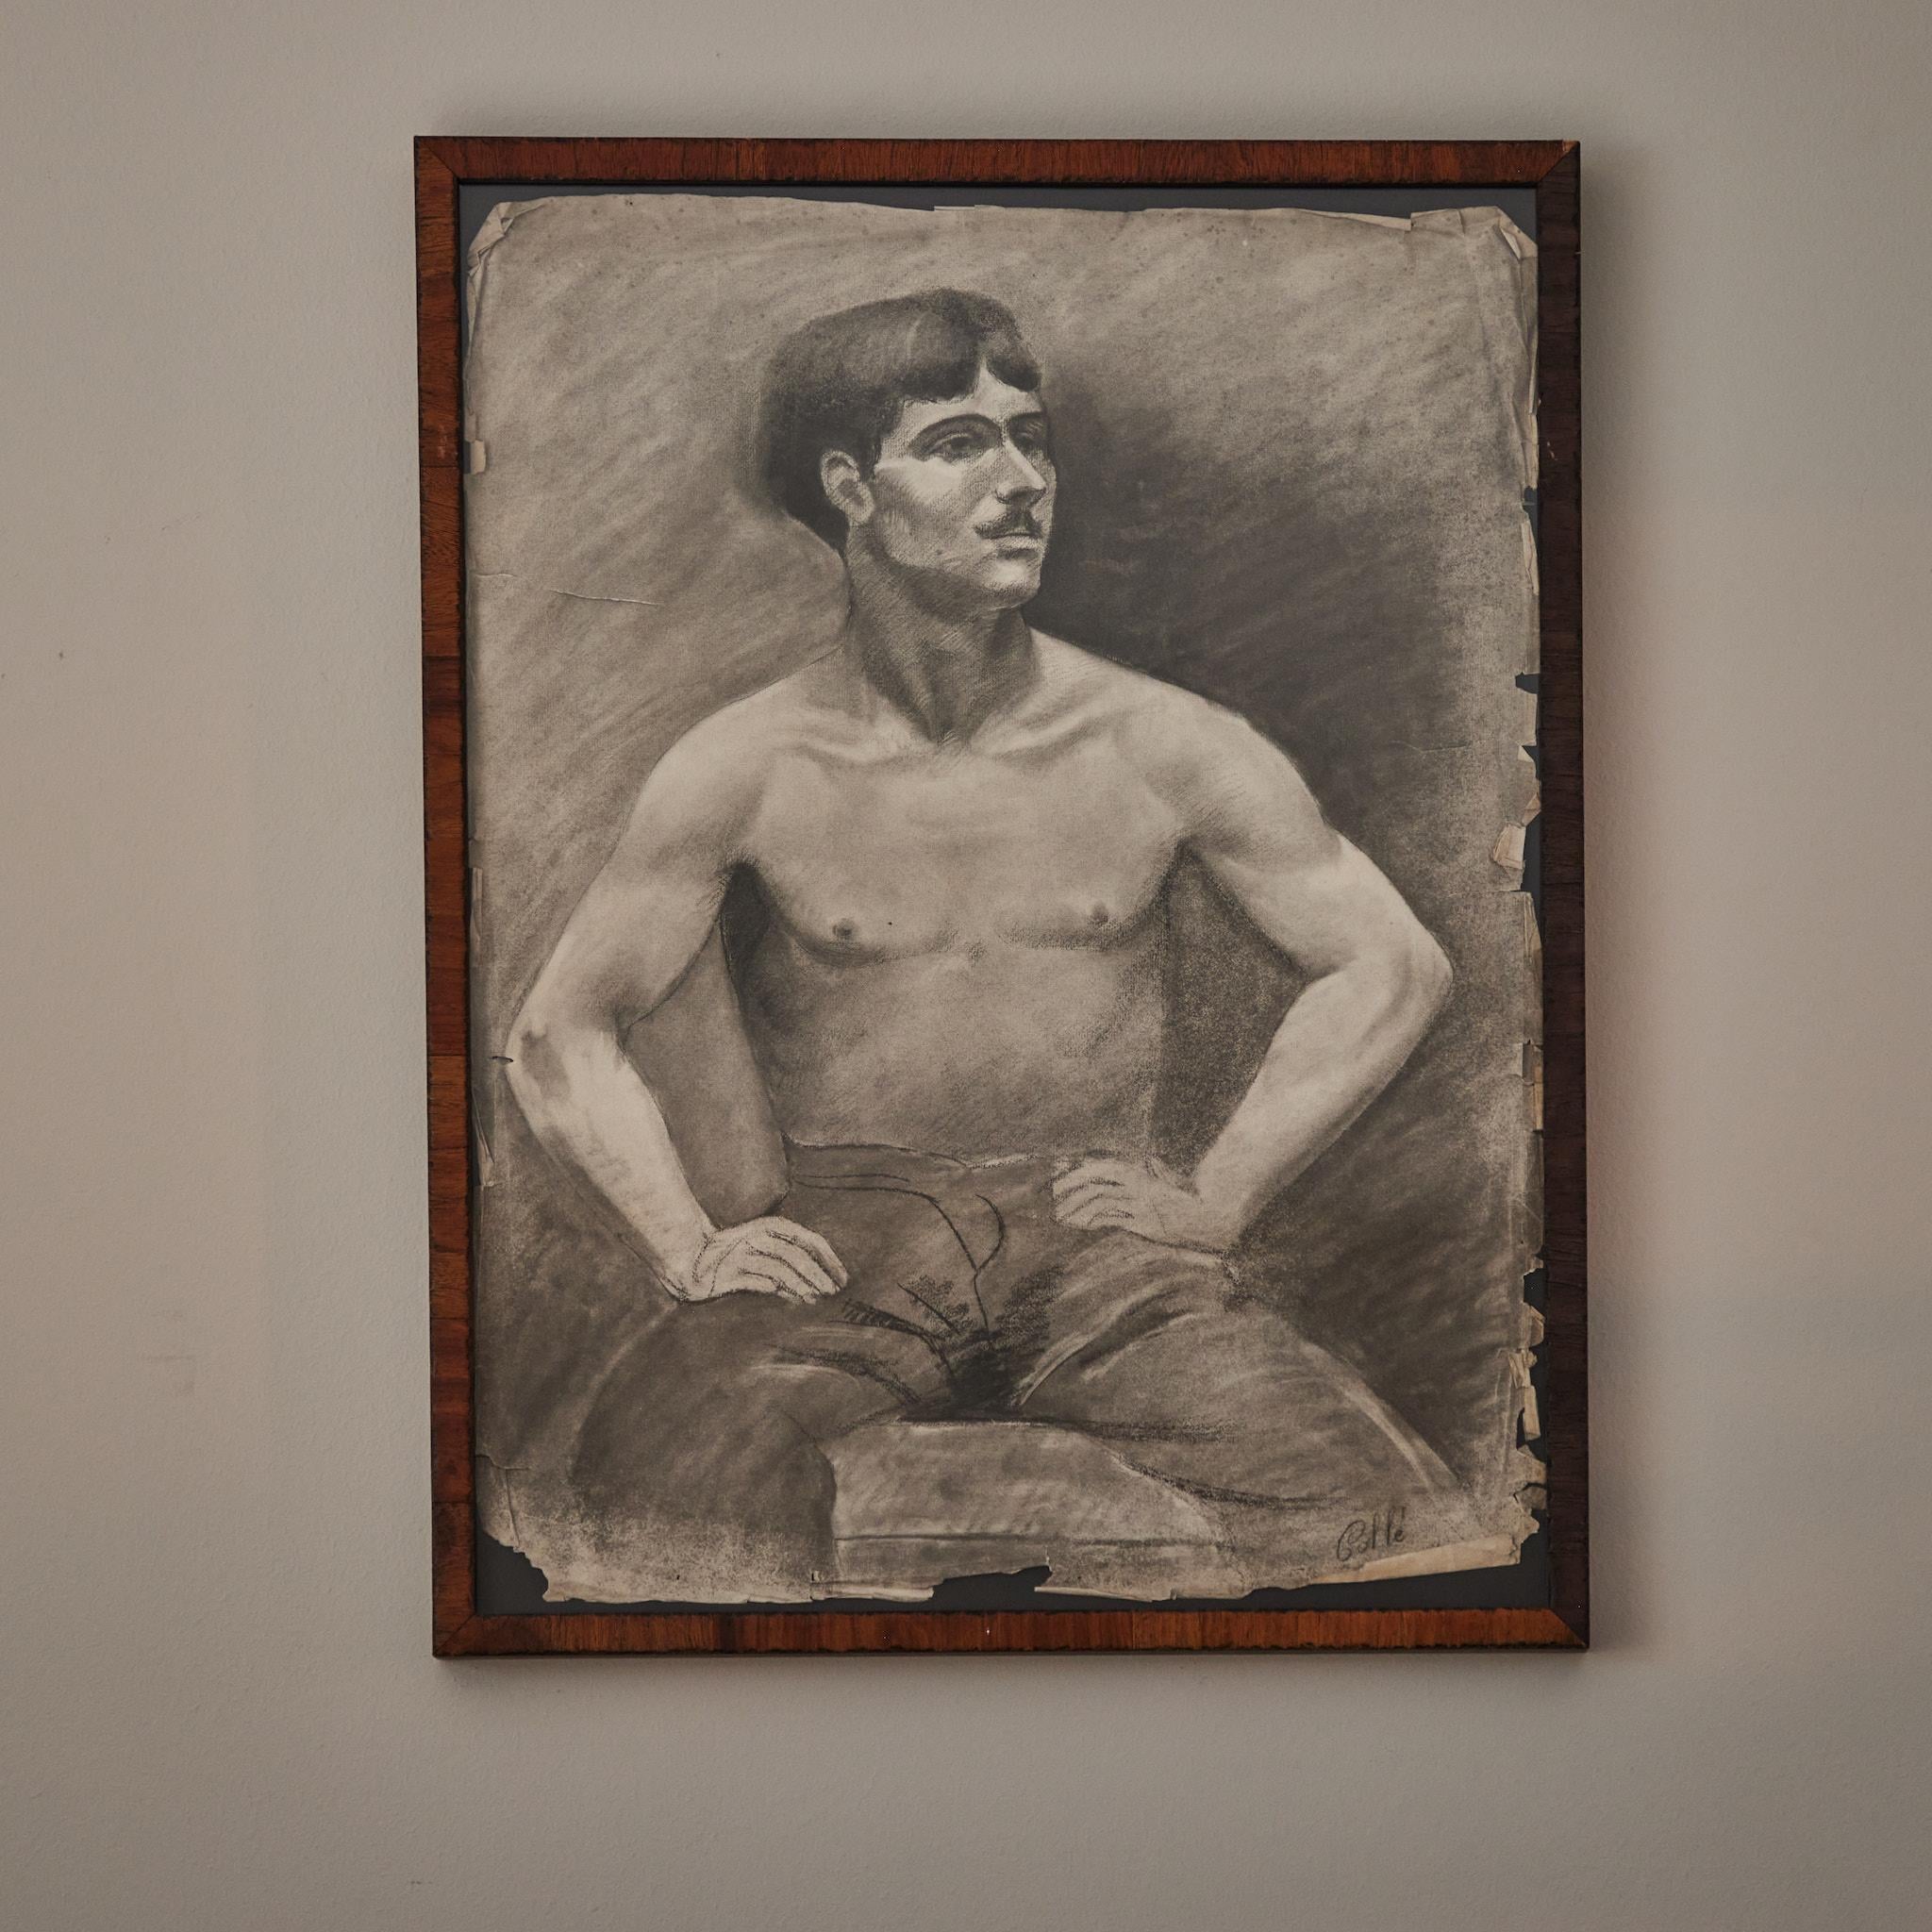 Early 20th-century French Academy-style charcoal drawing of seated male model. Mounted in a custom wood frame, the image has an introspective quality, and a charmingly exploratory sense of line. 
